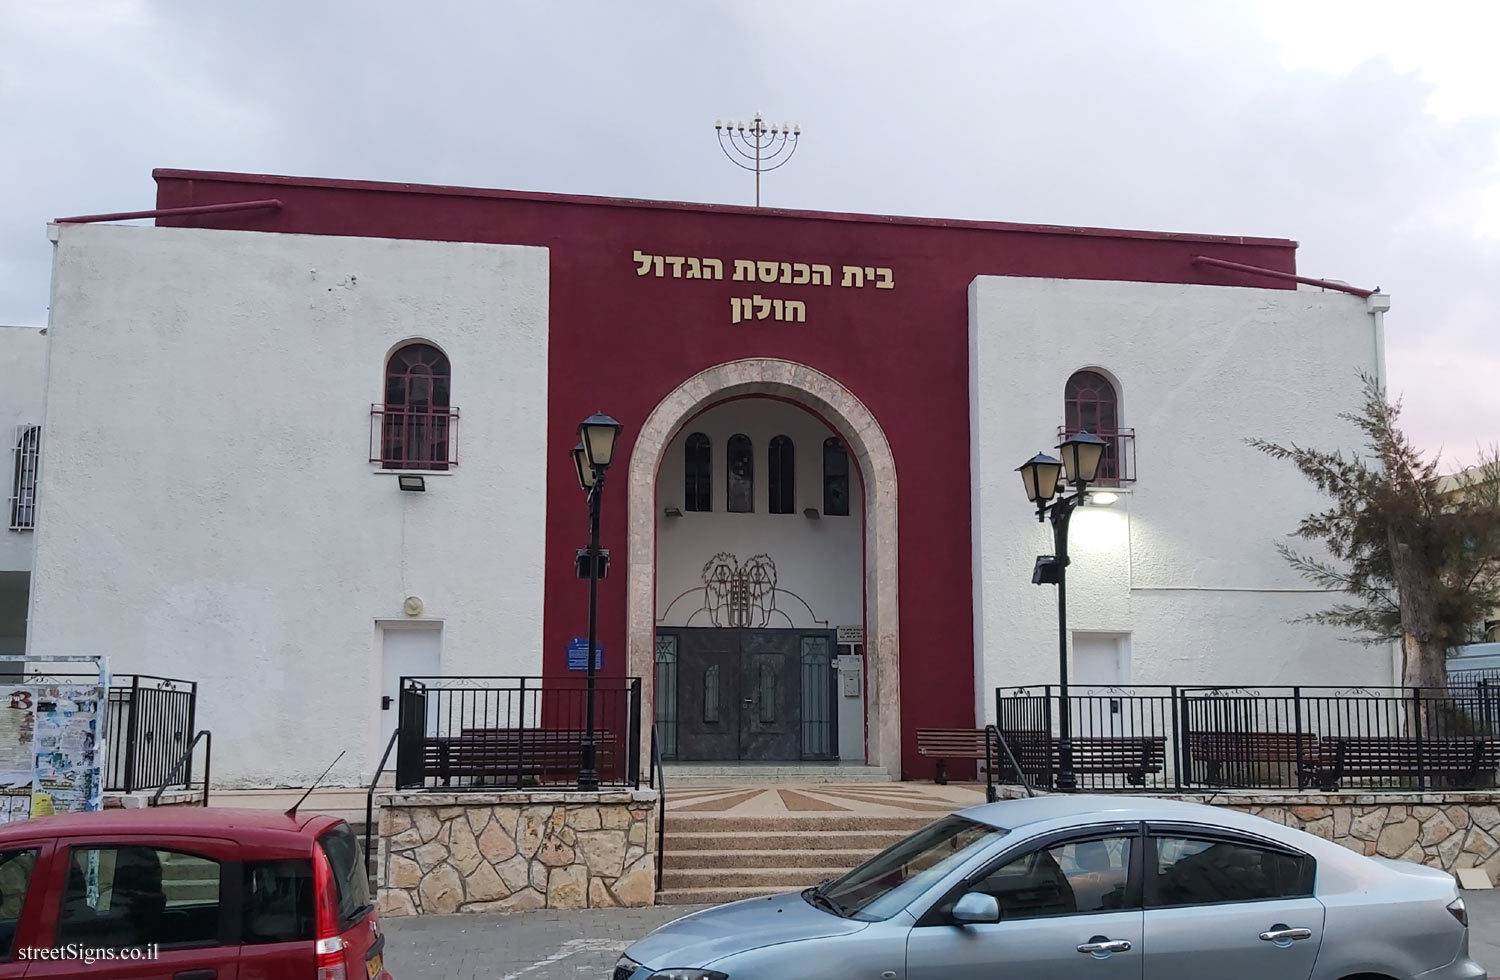 Holon - Heritage Sites in Israel - The Great Synagogue - HaRav Kuk St 5, Holon, Israel